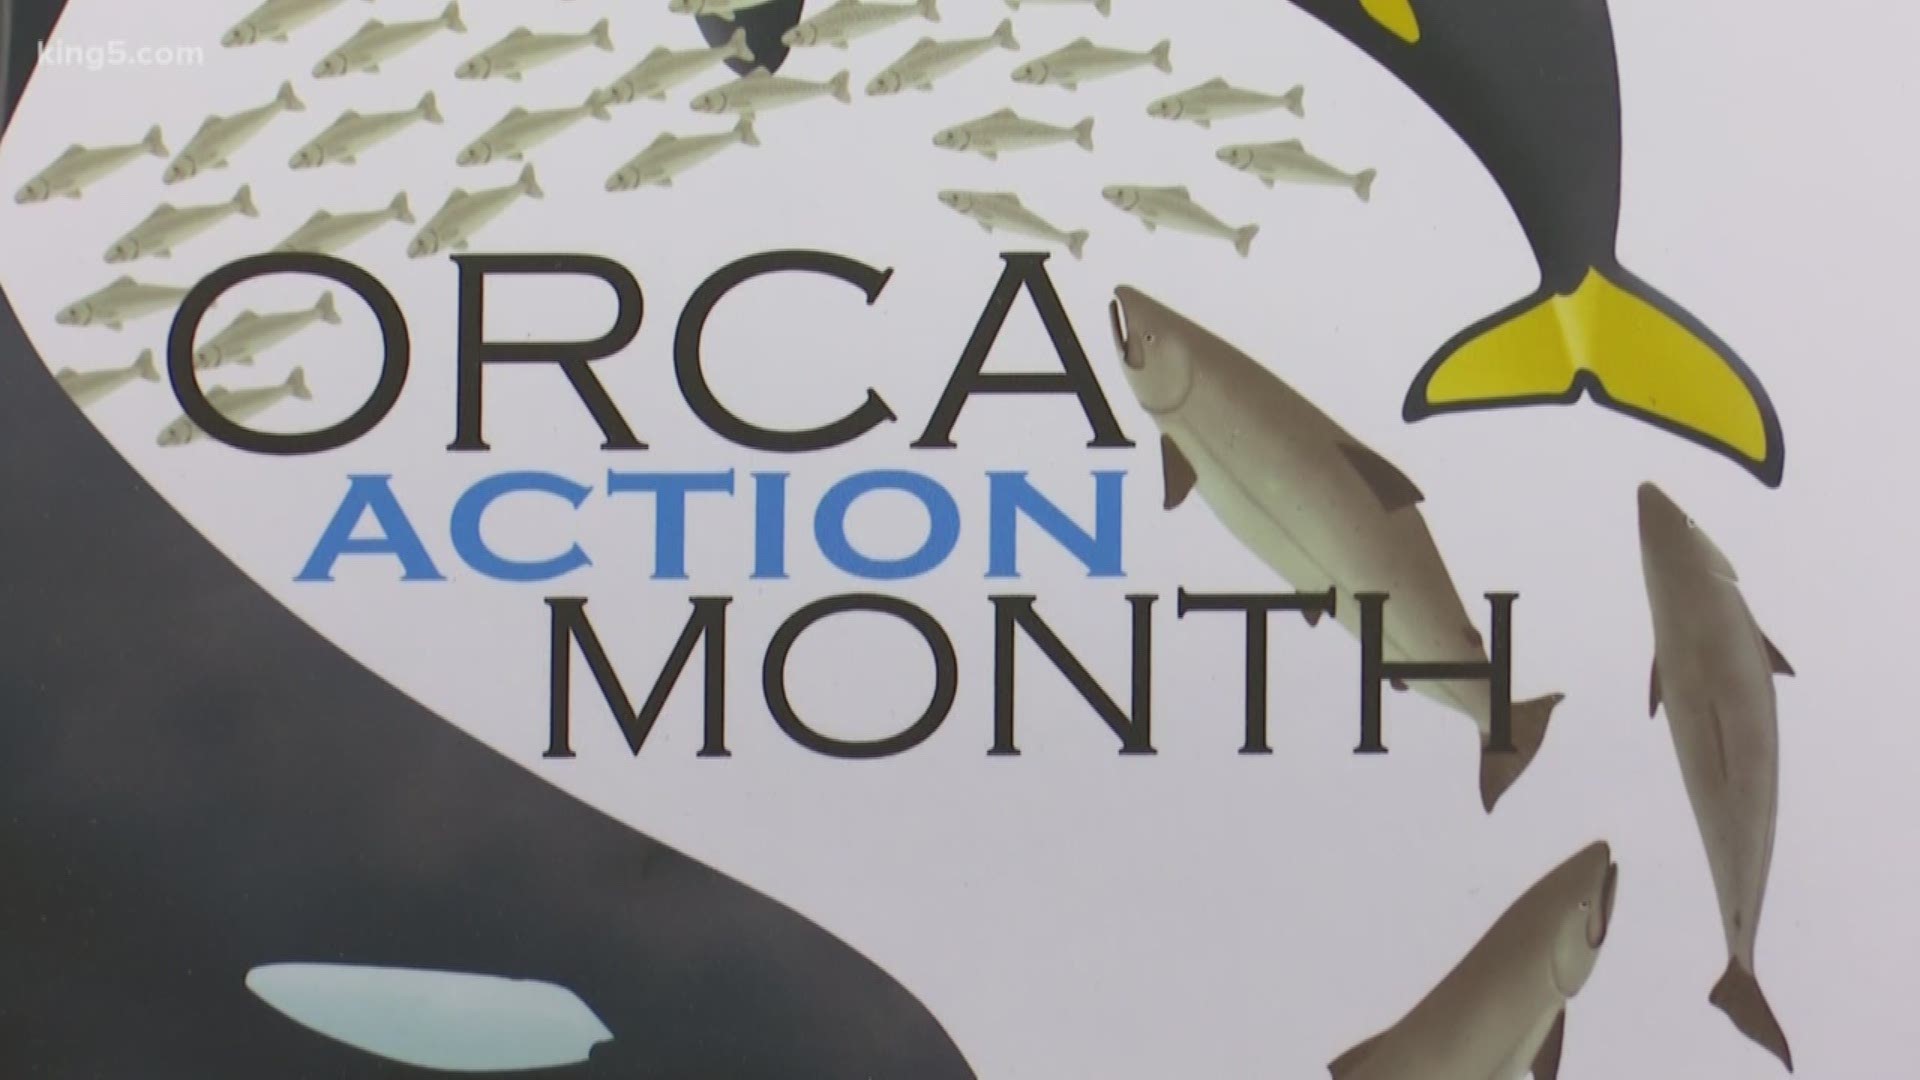 June is Orca Month, and for the past 12 years, it has been about raising awareness. But now, organizers are saying this year it is about action. KING 5's Kalie Greenberg explains.